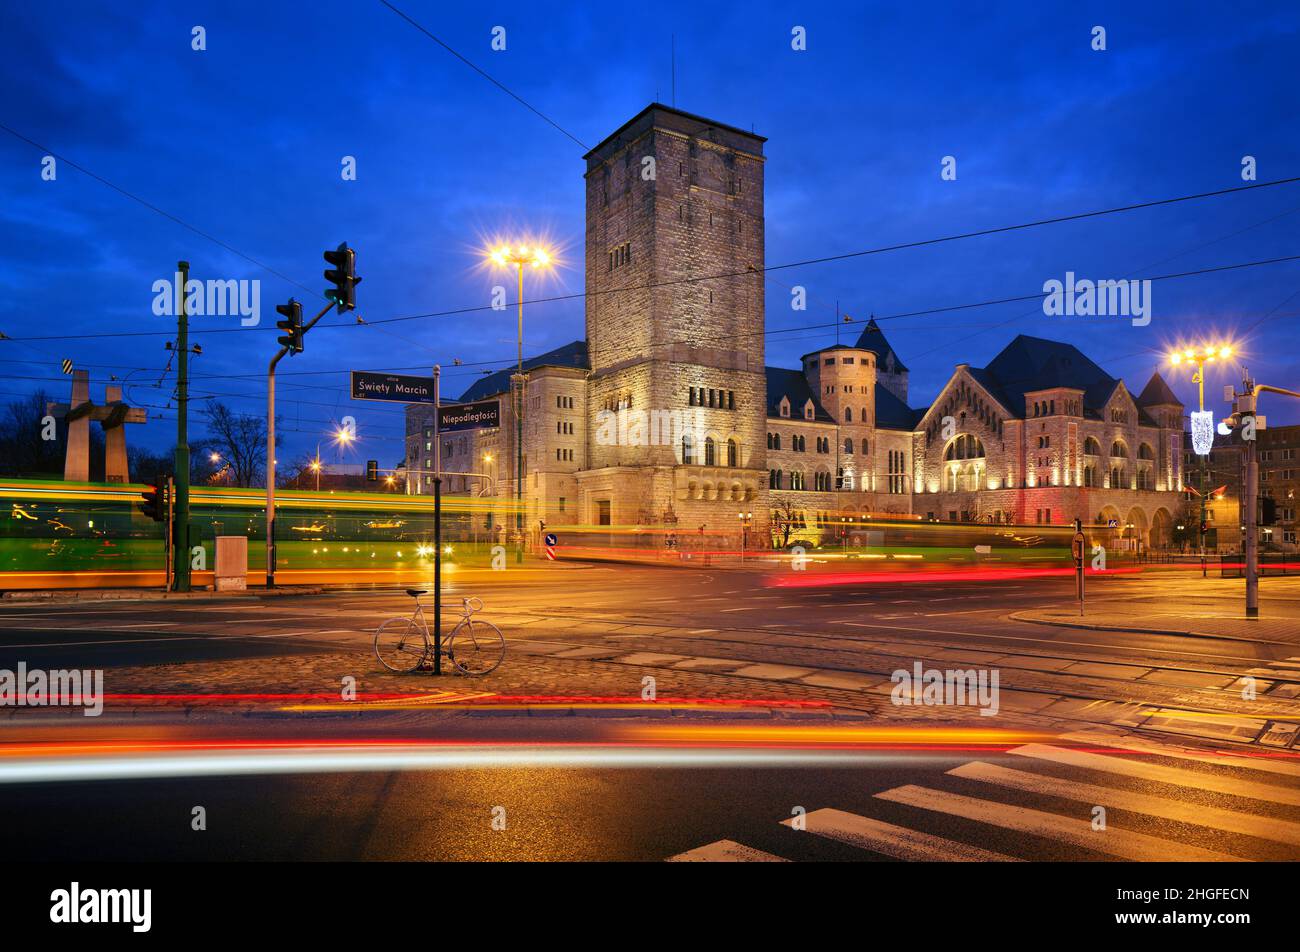 Poznan, Wielkopolska, Poland - imperial castle, prussian architecture and tram at night Stock Photo